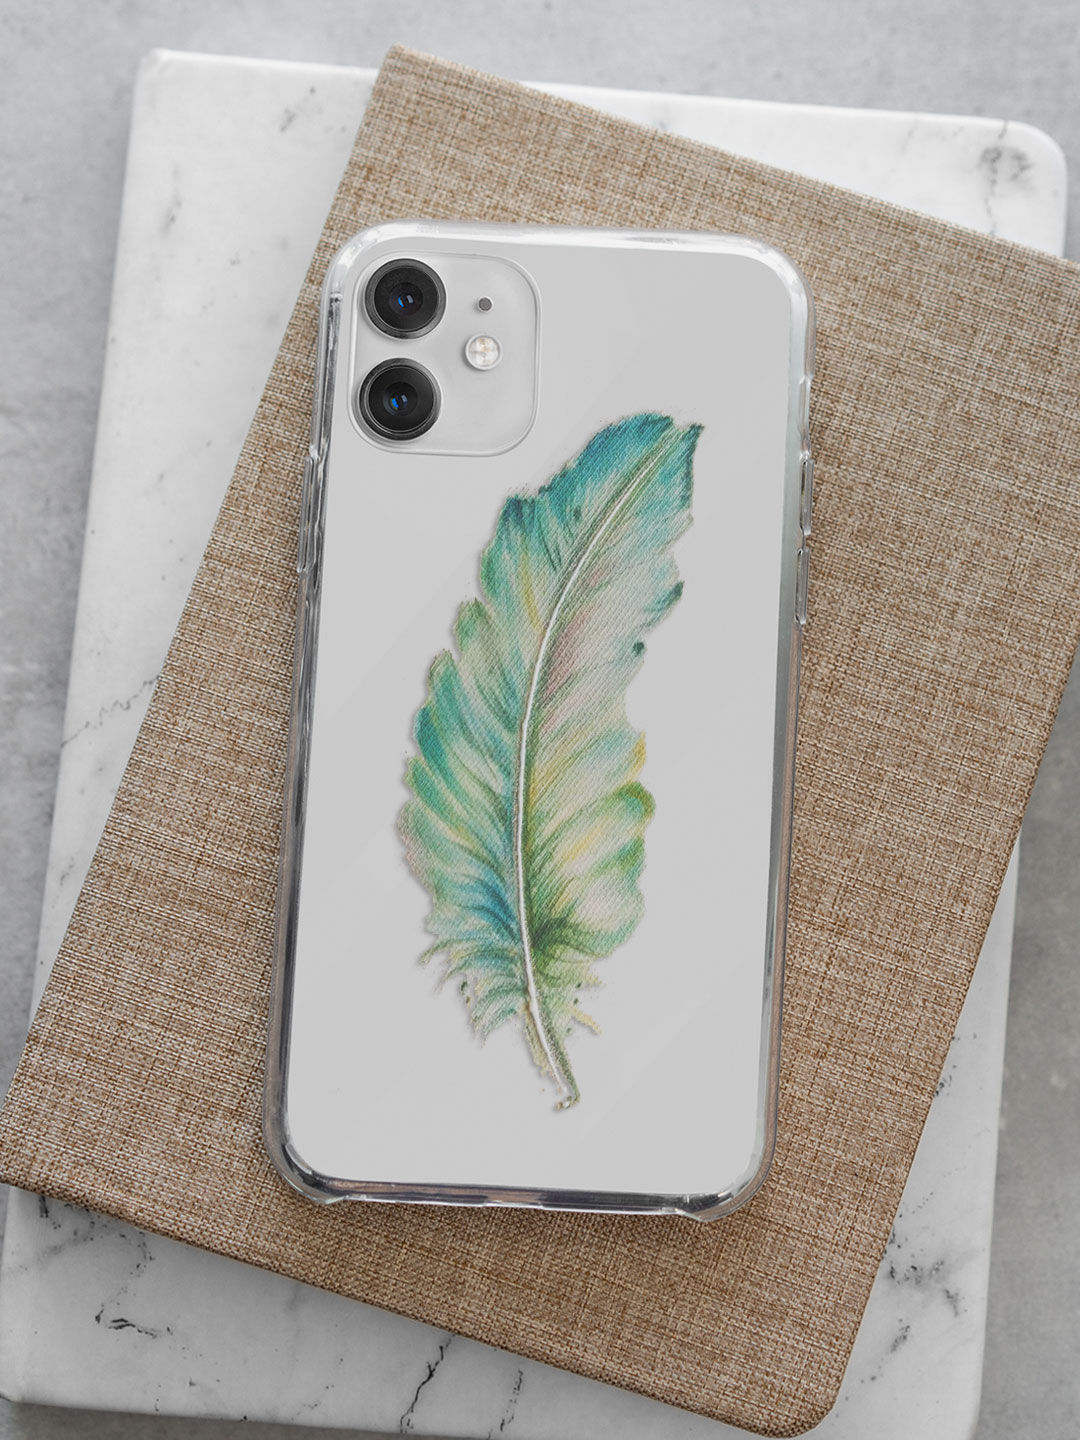 12 Amazing FEATHER Crafts